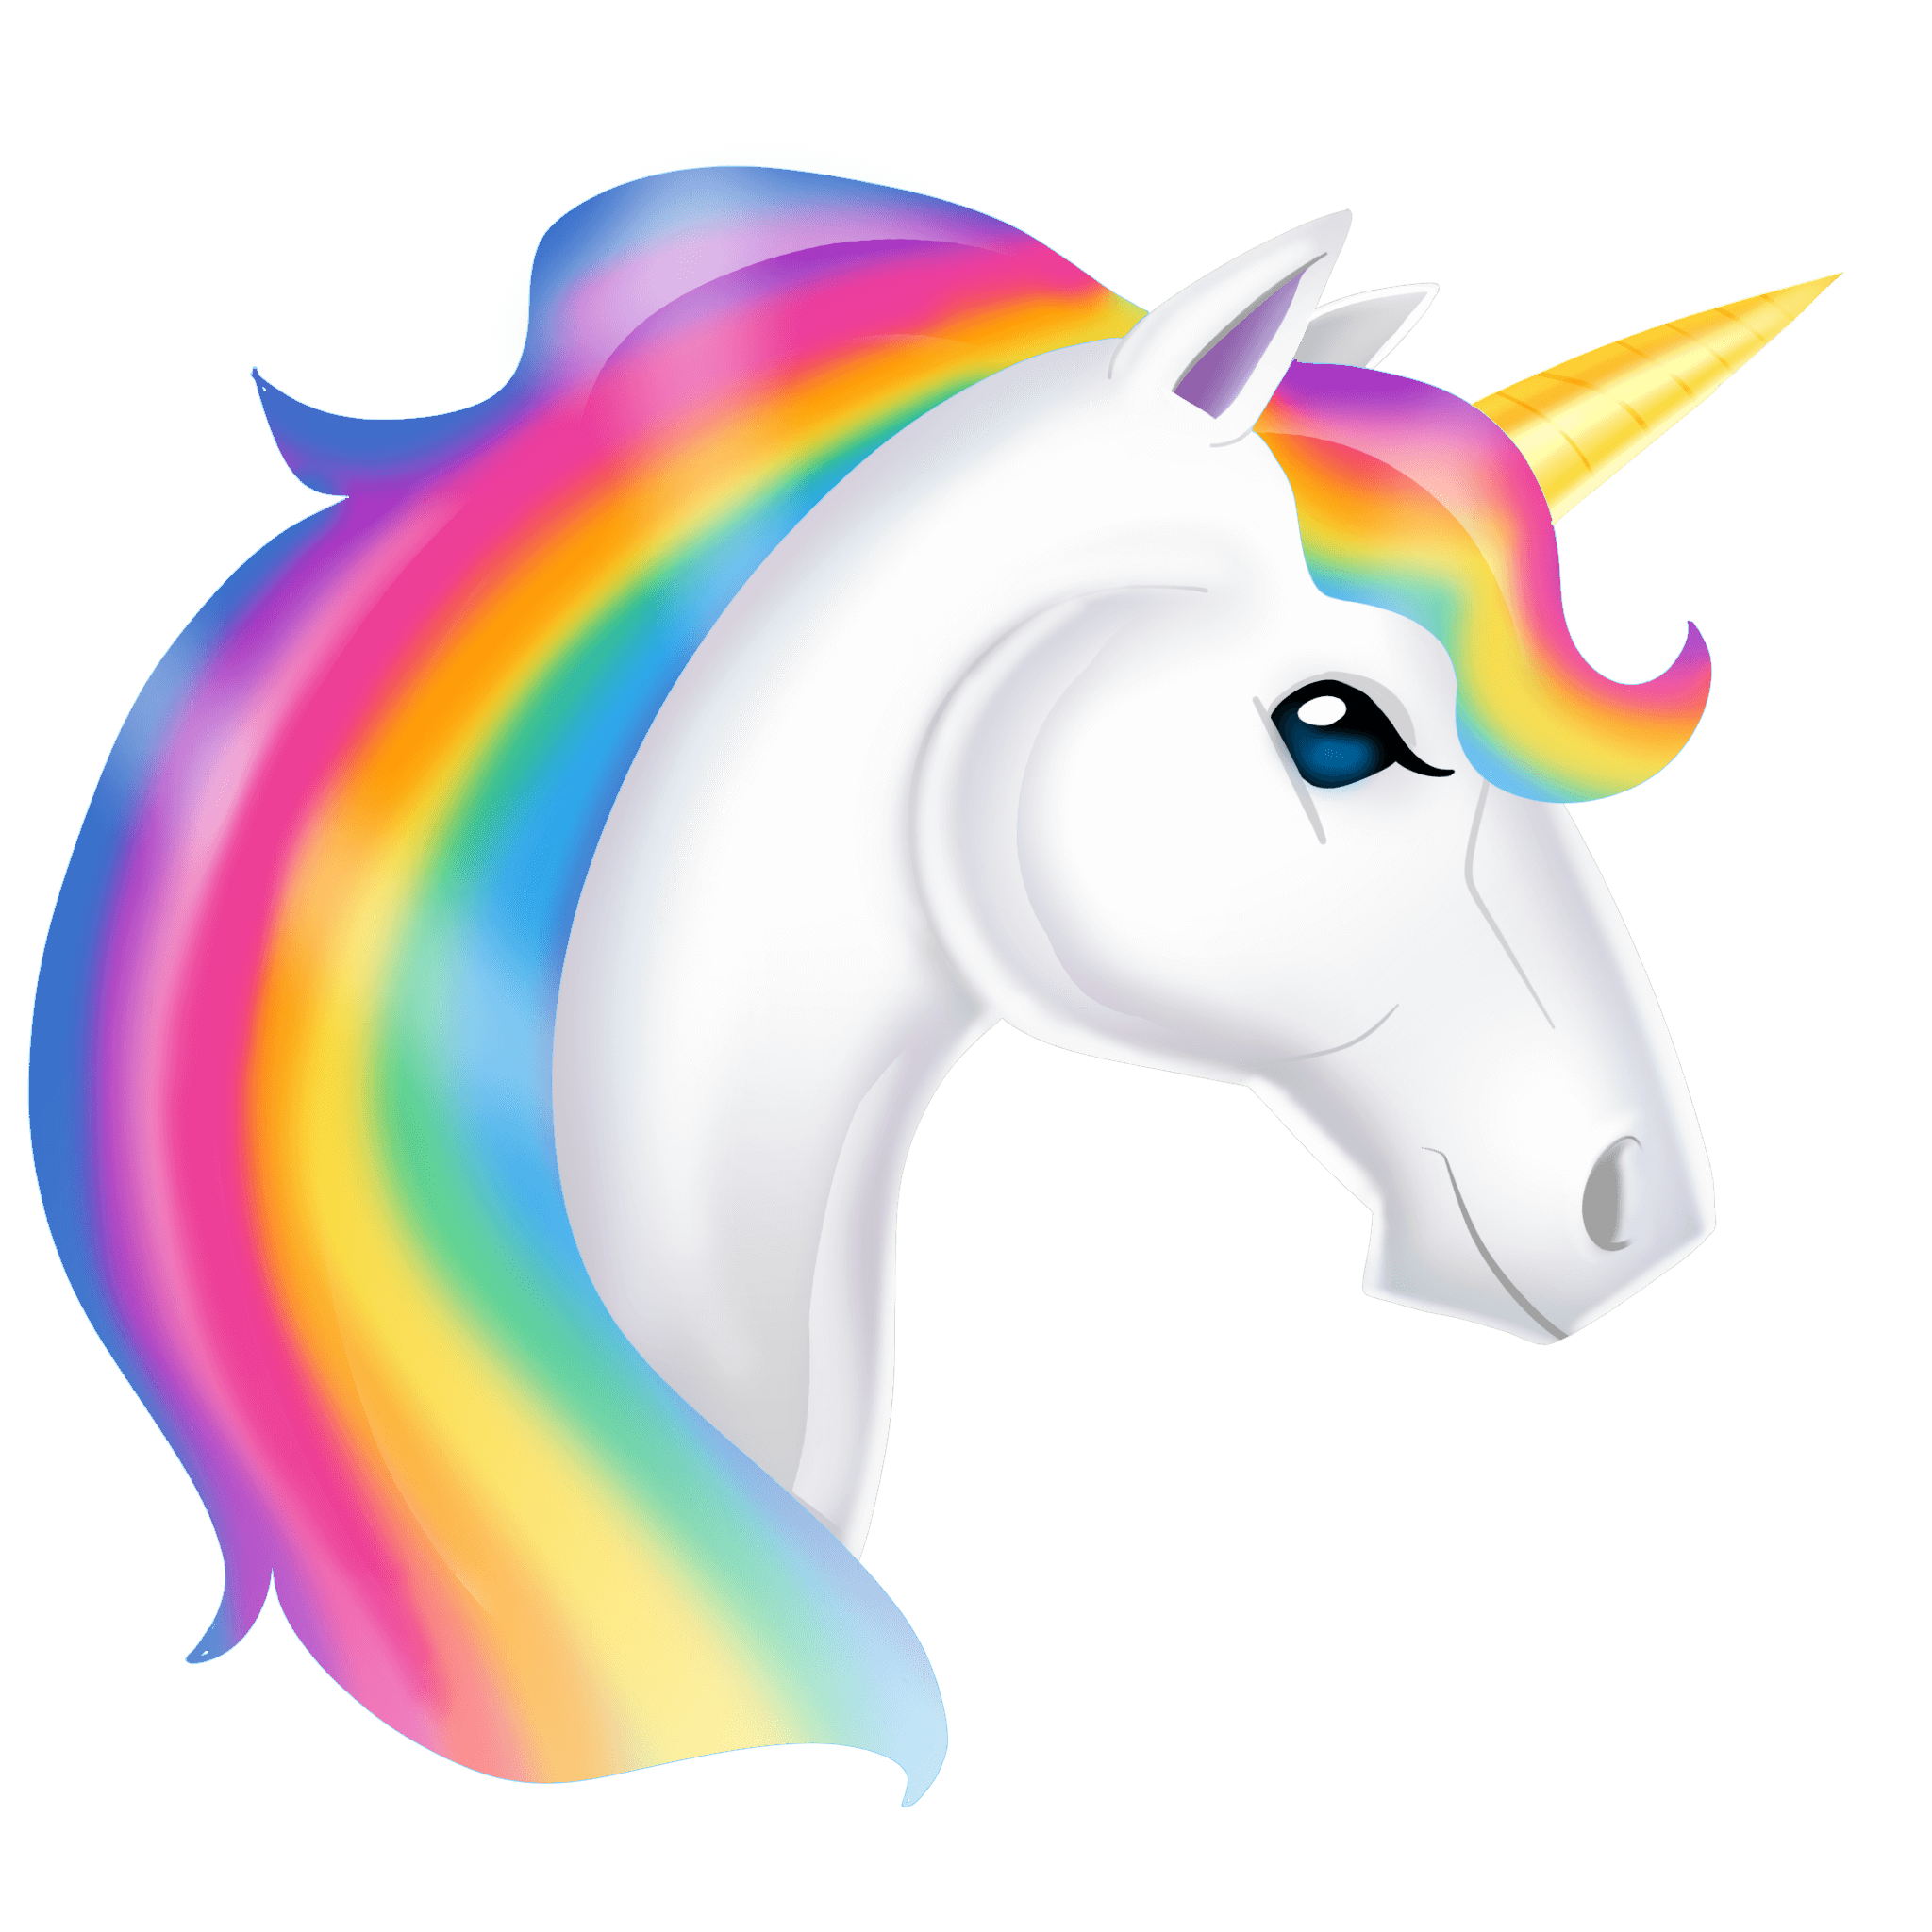 Rainbow Colors, The Horses Head, Unicorn PNG Transparent Background, Free  Download #48621 - FreeIconsPNG